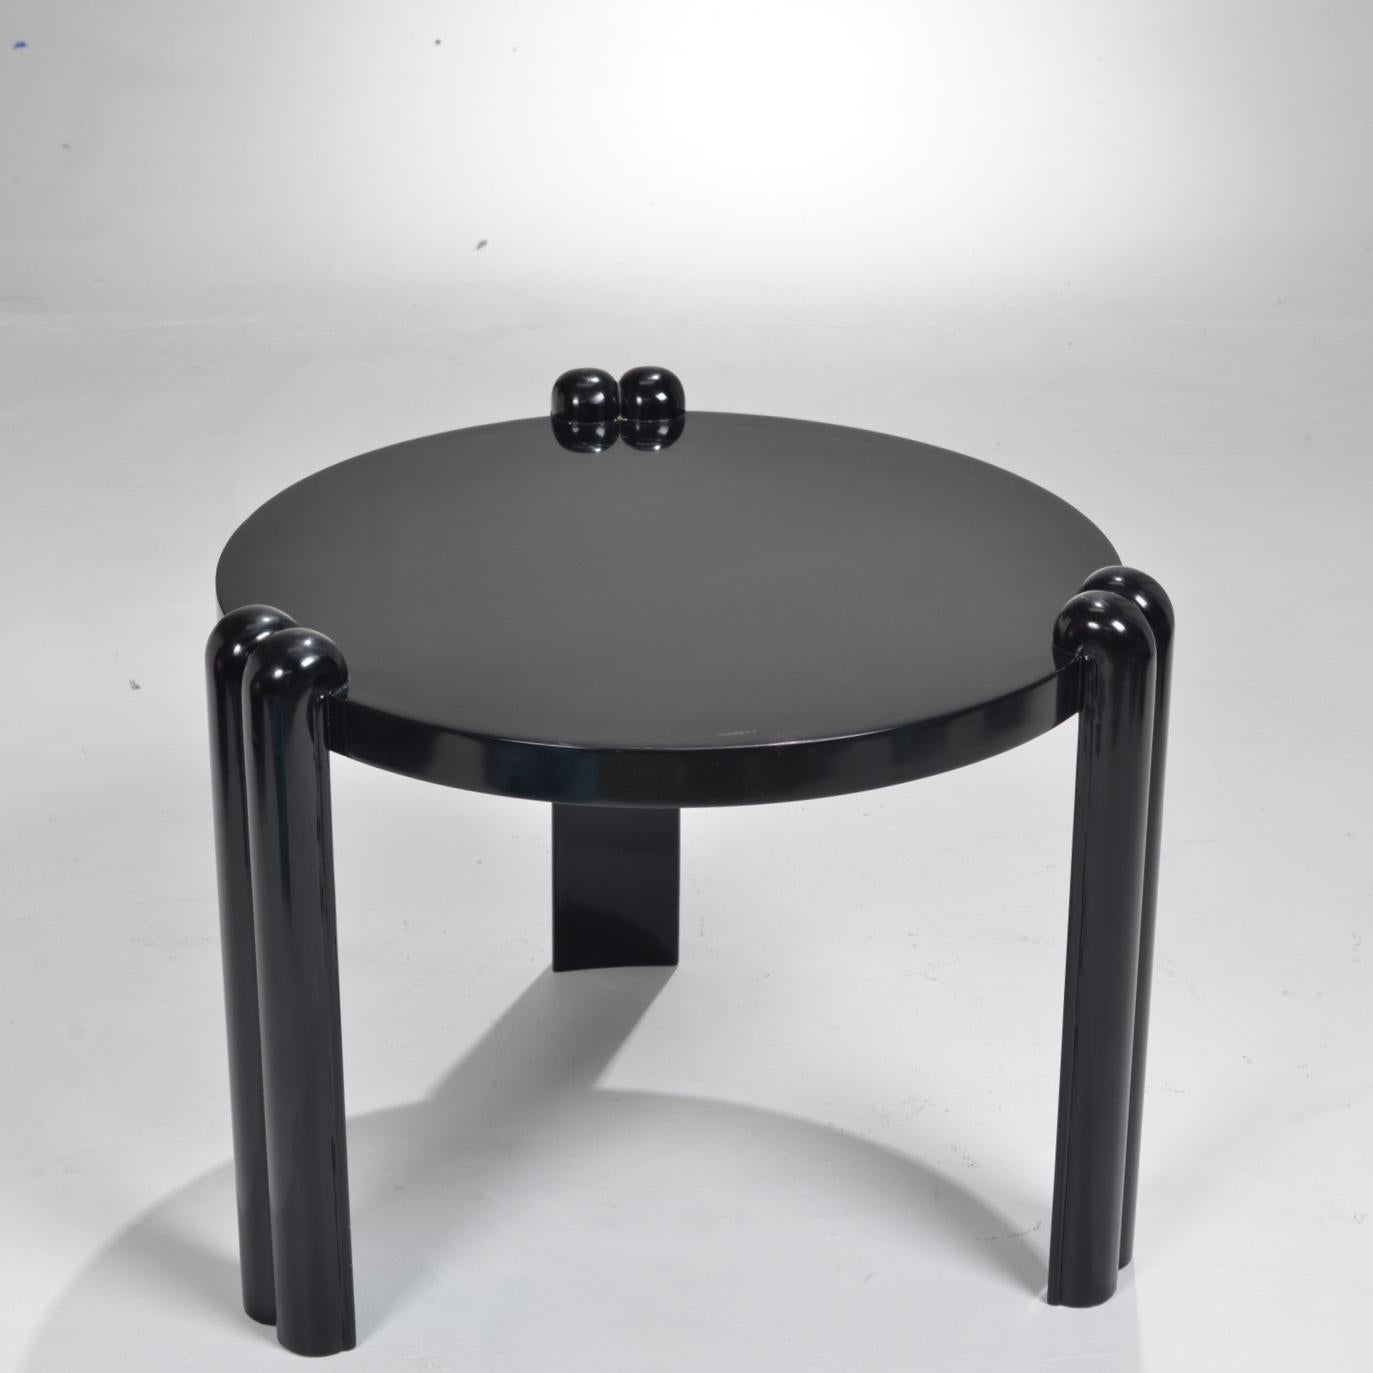 Late 20th Century Italian Post-Modern Lacquered Black End Table